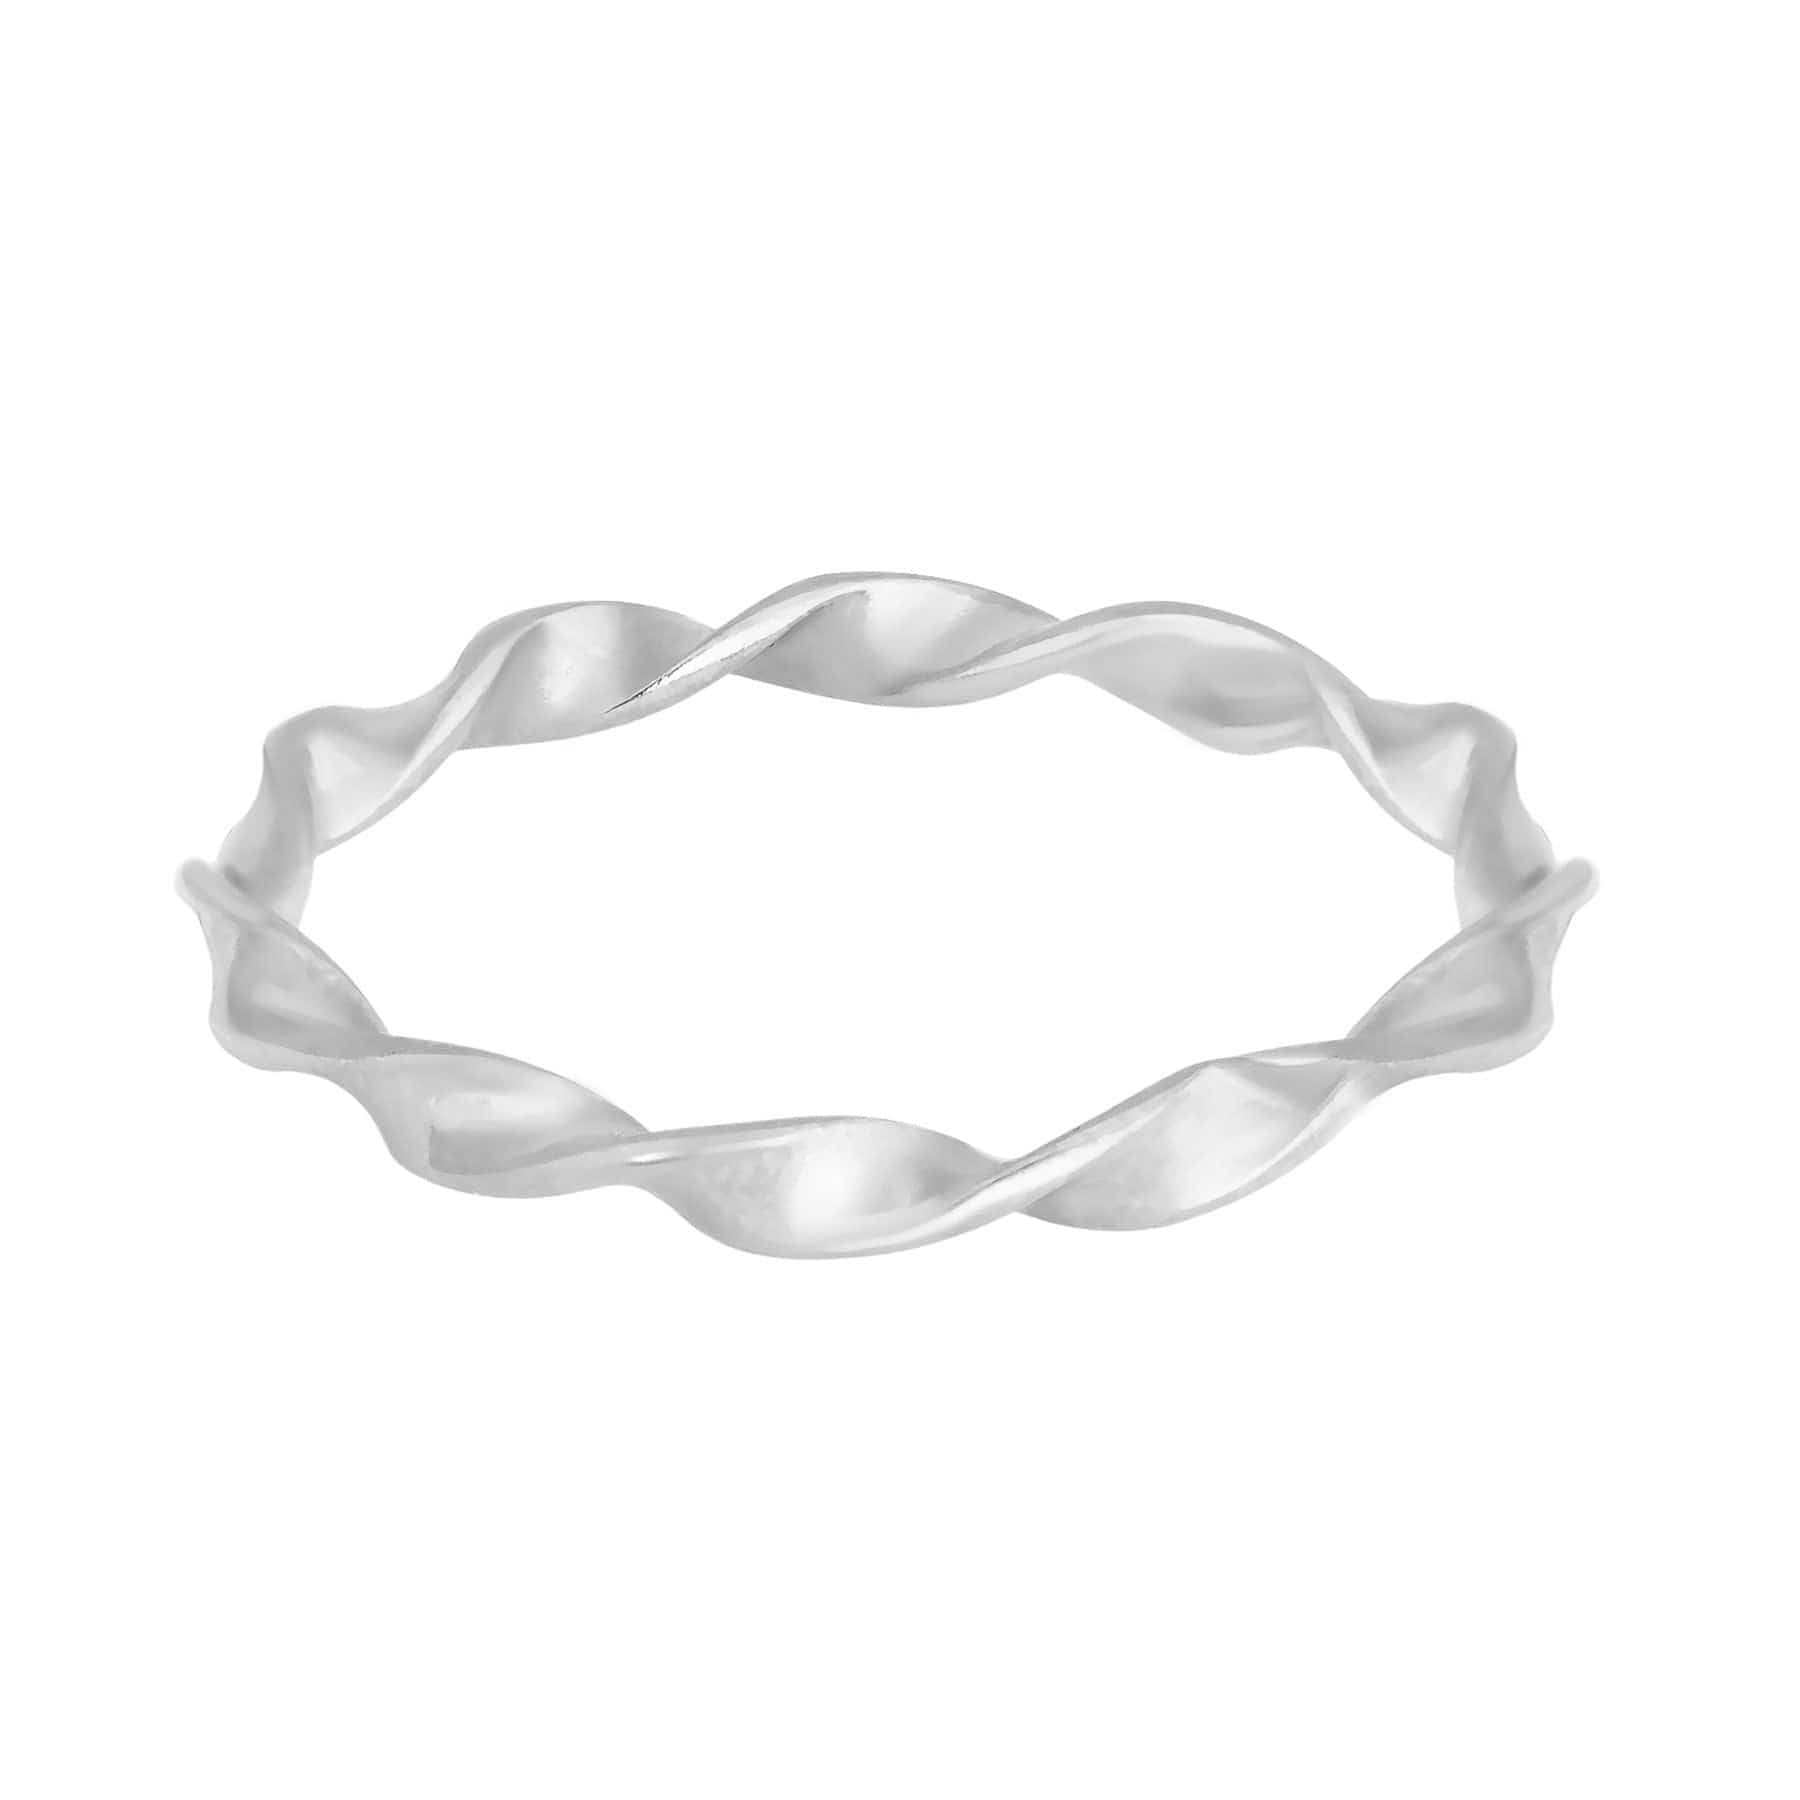 BohoMoon Stainless Steel Eleanor Ring Silver / US 5 / UK J / EUR 49 (x small)